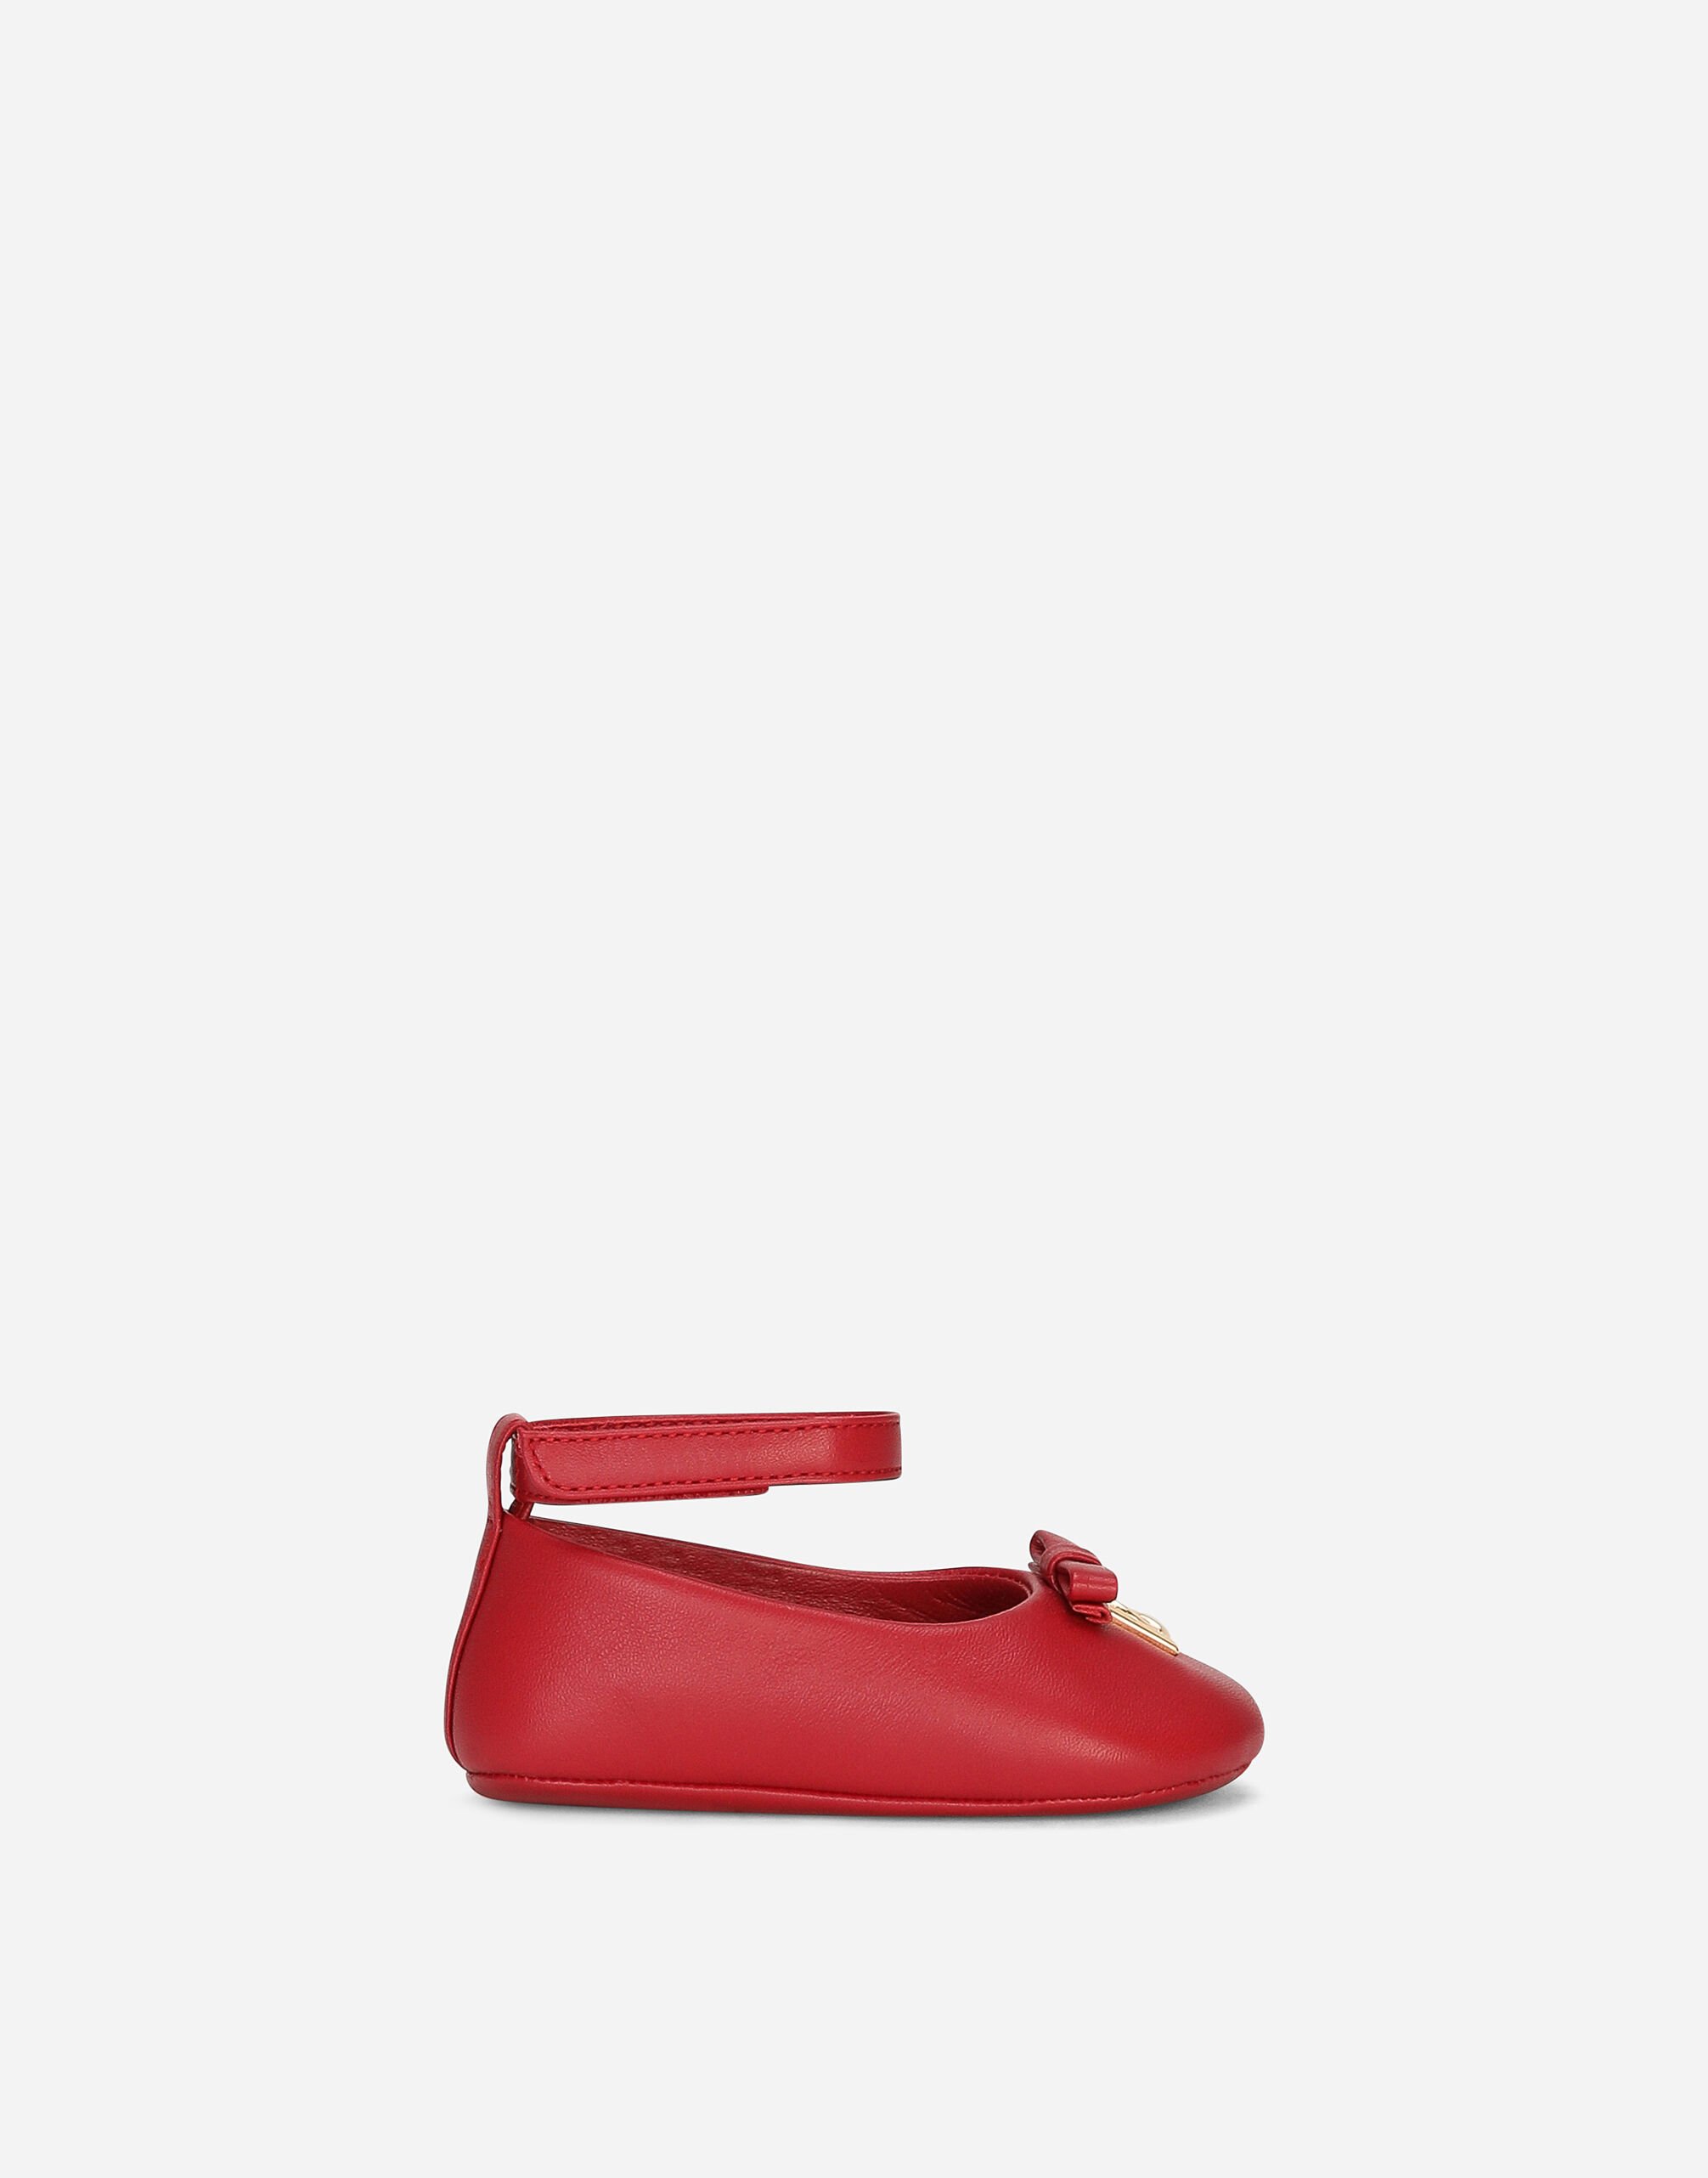 Dolce & Gabbana Nappa leather ballet flats Red DK0065AB793